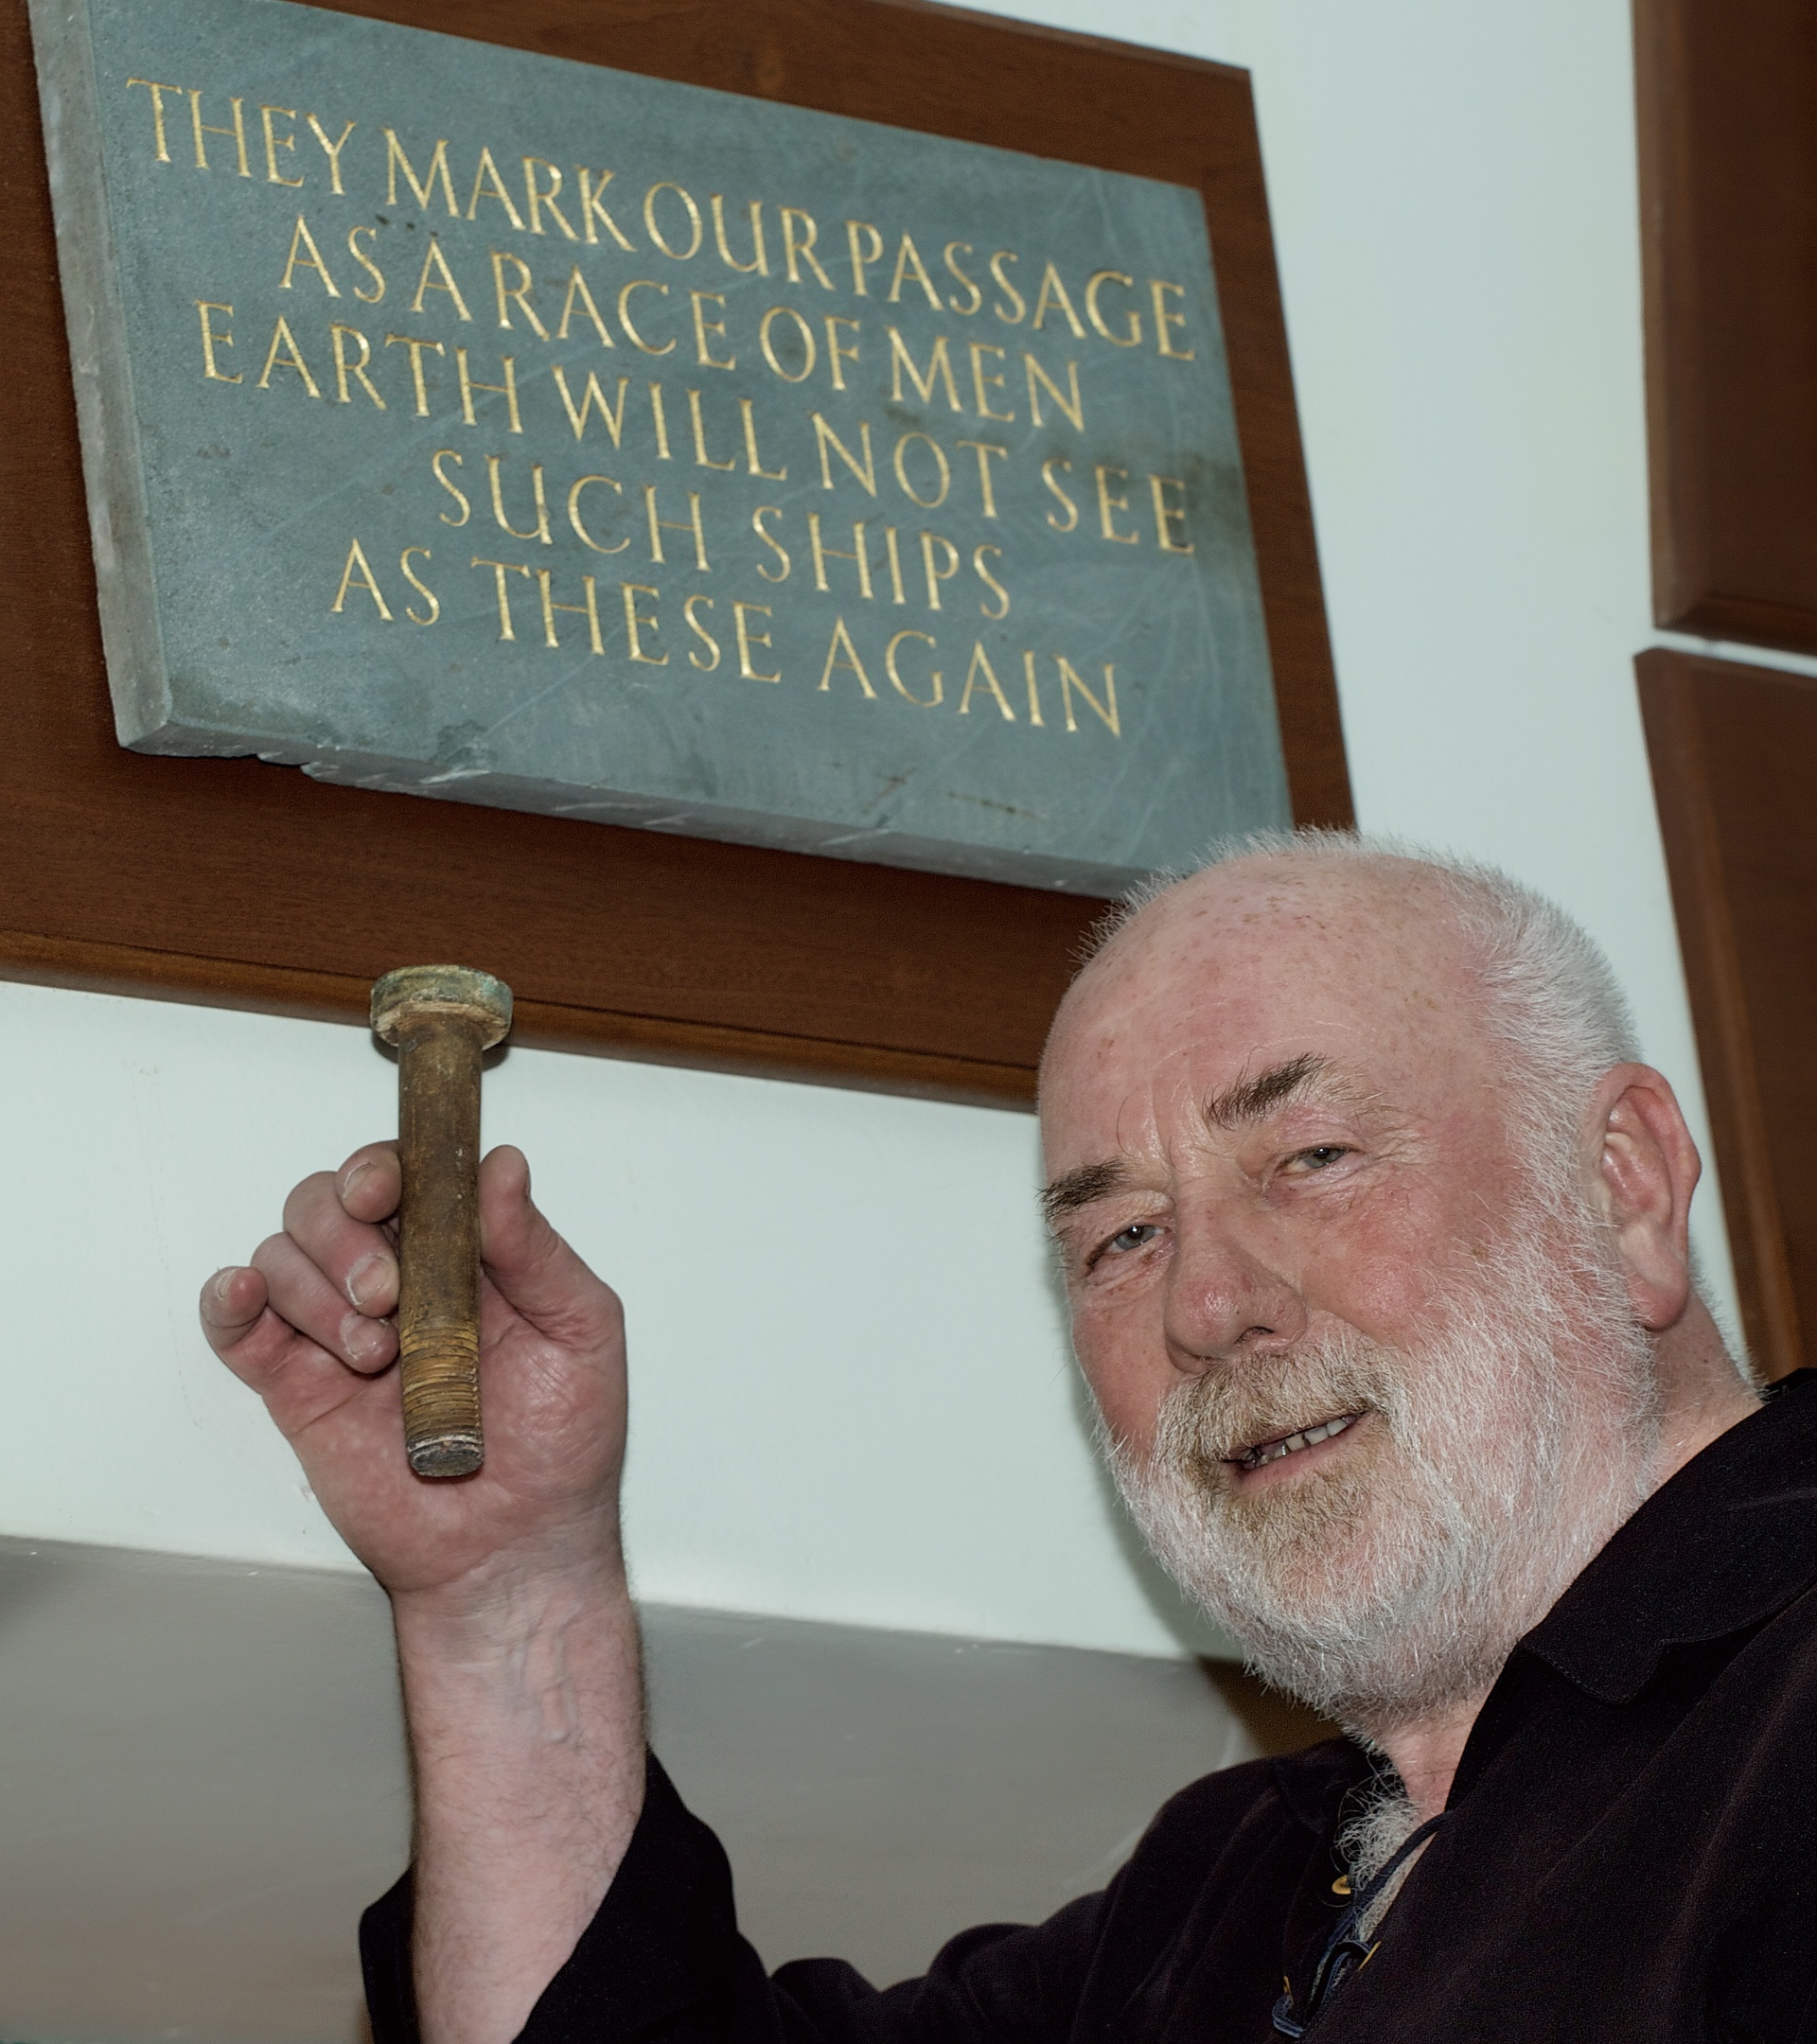 First piece of the tea clipper "Cutty Sark" to come back home to Inverbervie and Scotland, an original bolt from the hull is proudly held by Dave Ramsay in the Burgh  Hall Inverbervie beside the Hercules Linton Memorial.